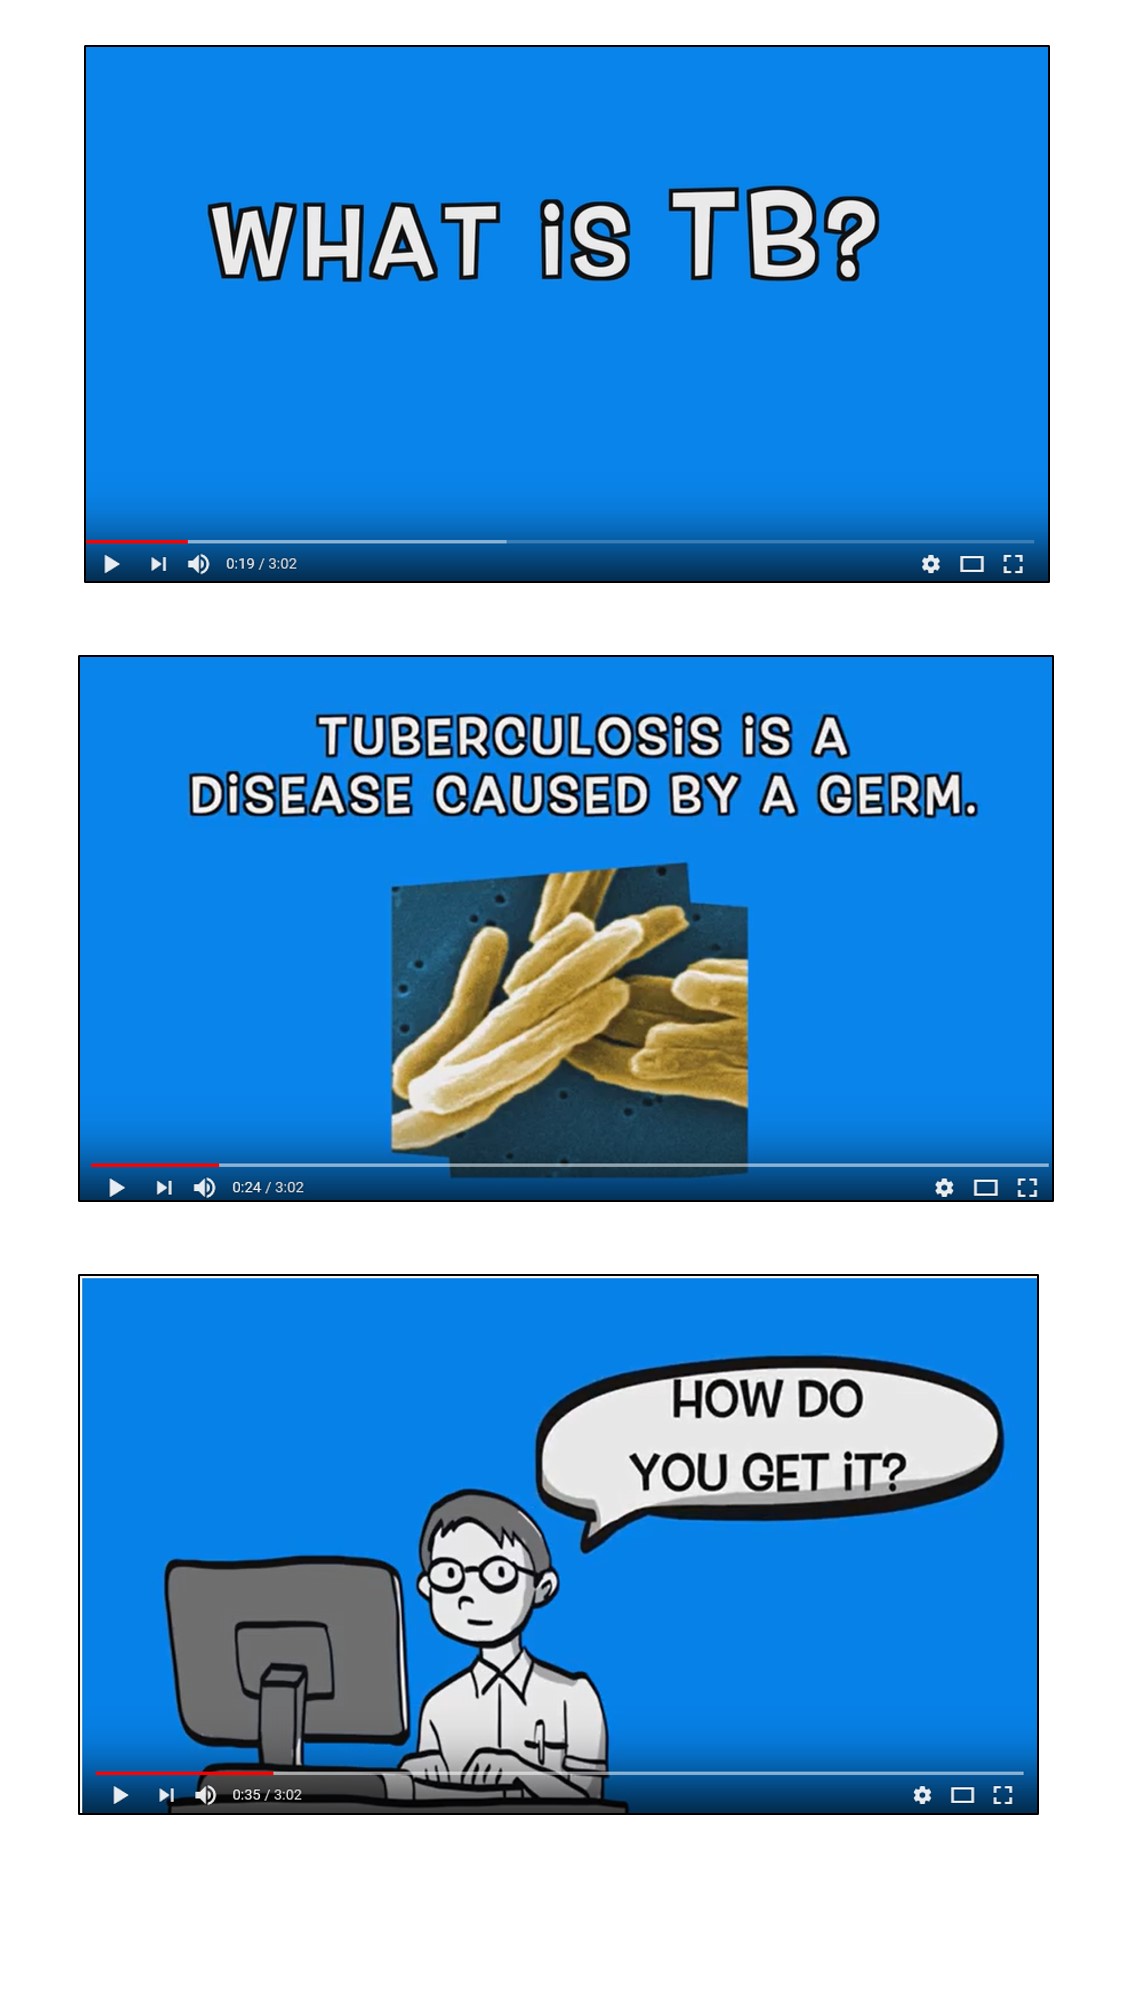 What is TB?